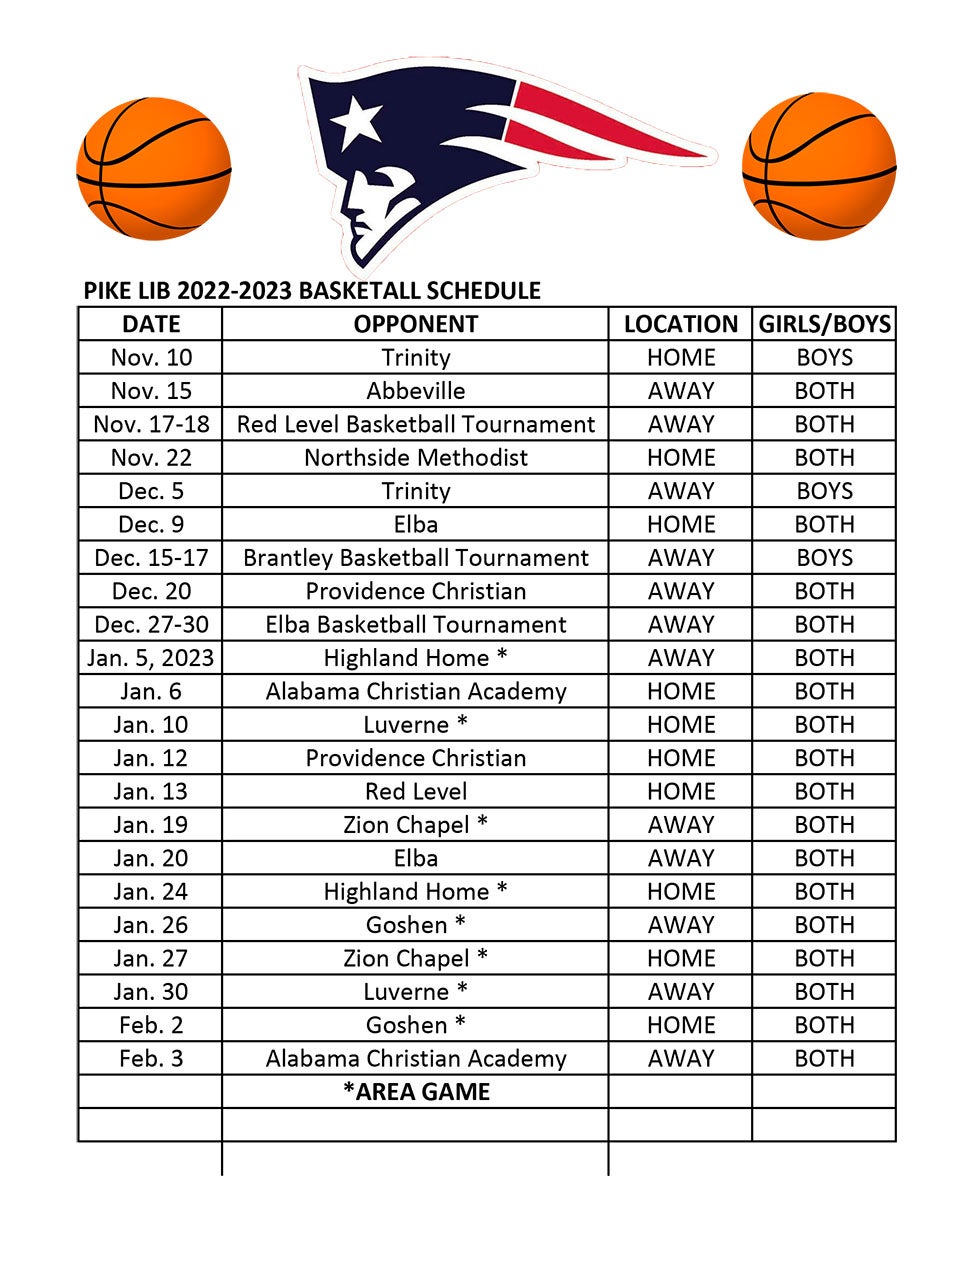 pike-lib-basketball-schedule-released-the-troy-messenger-the-troy